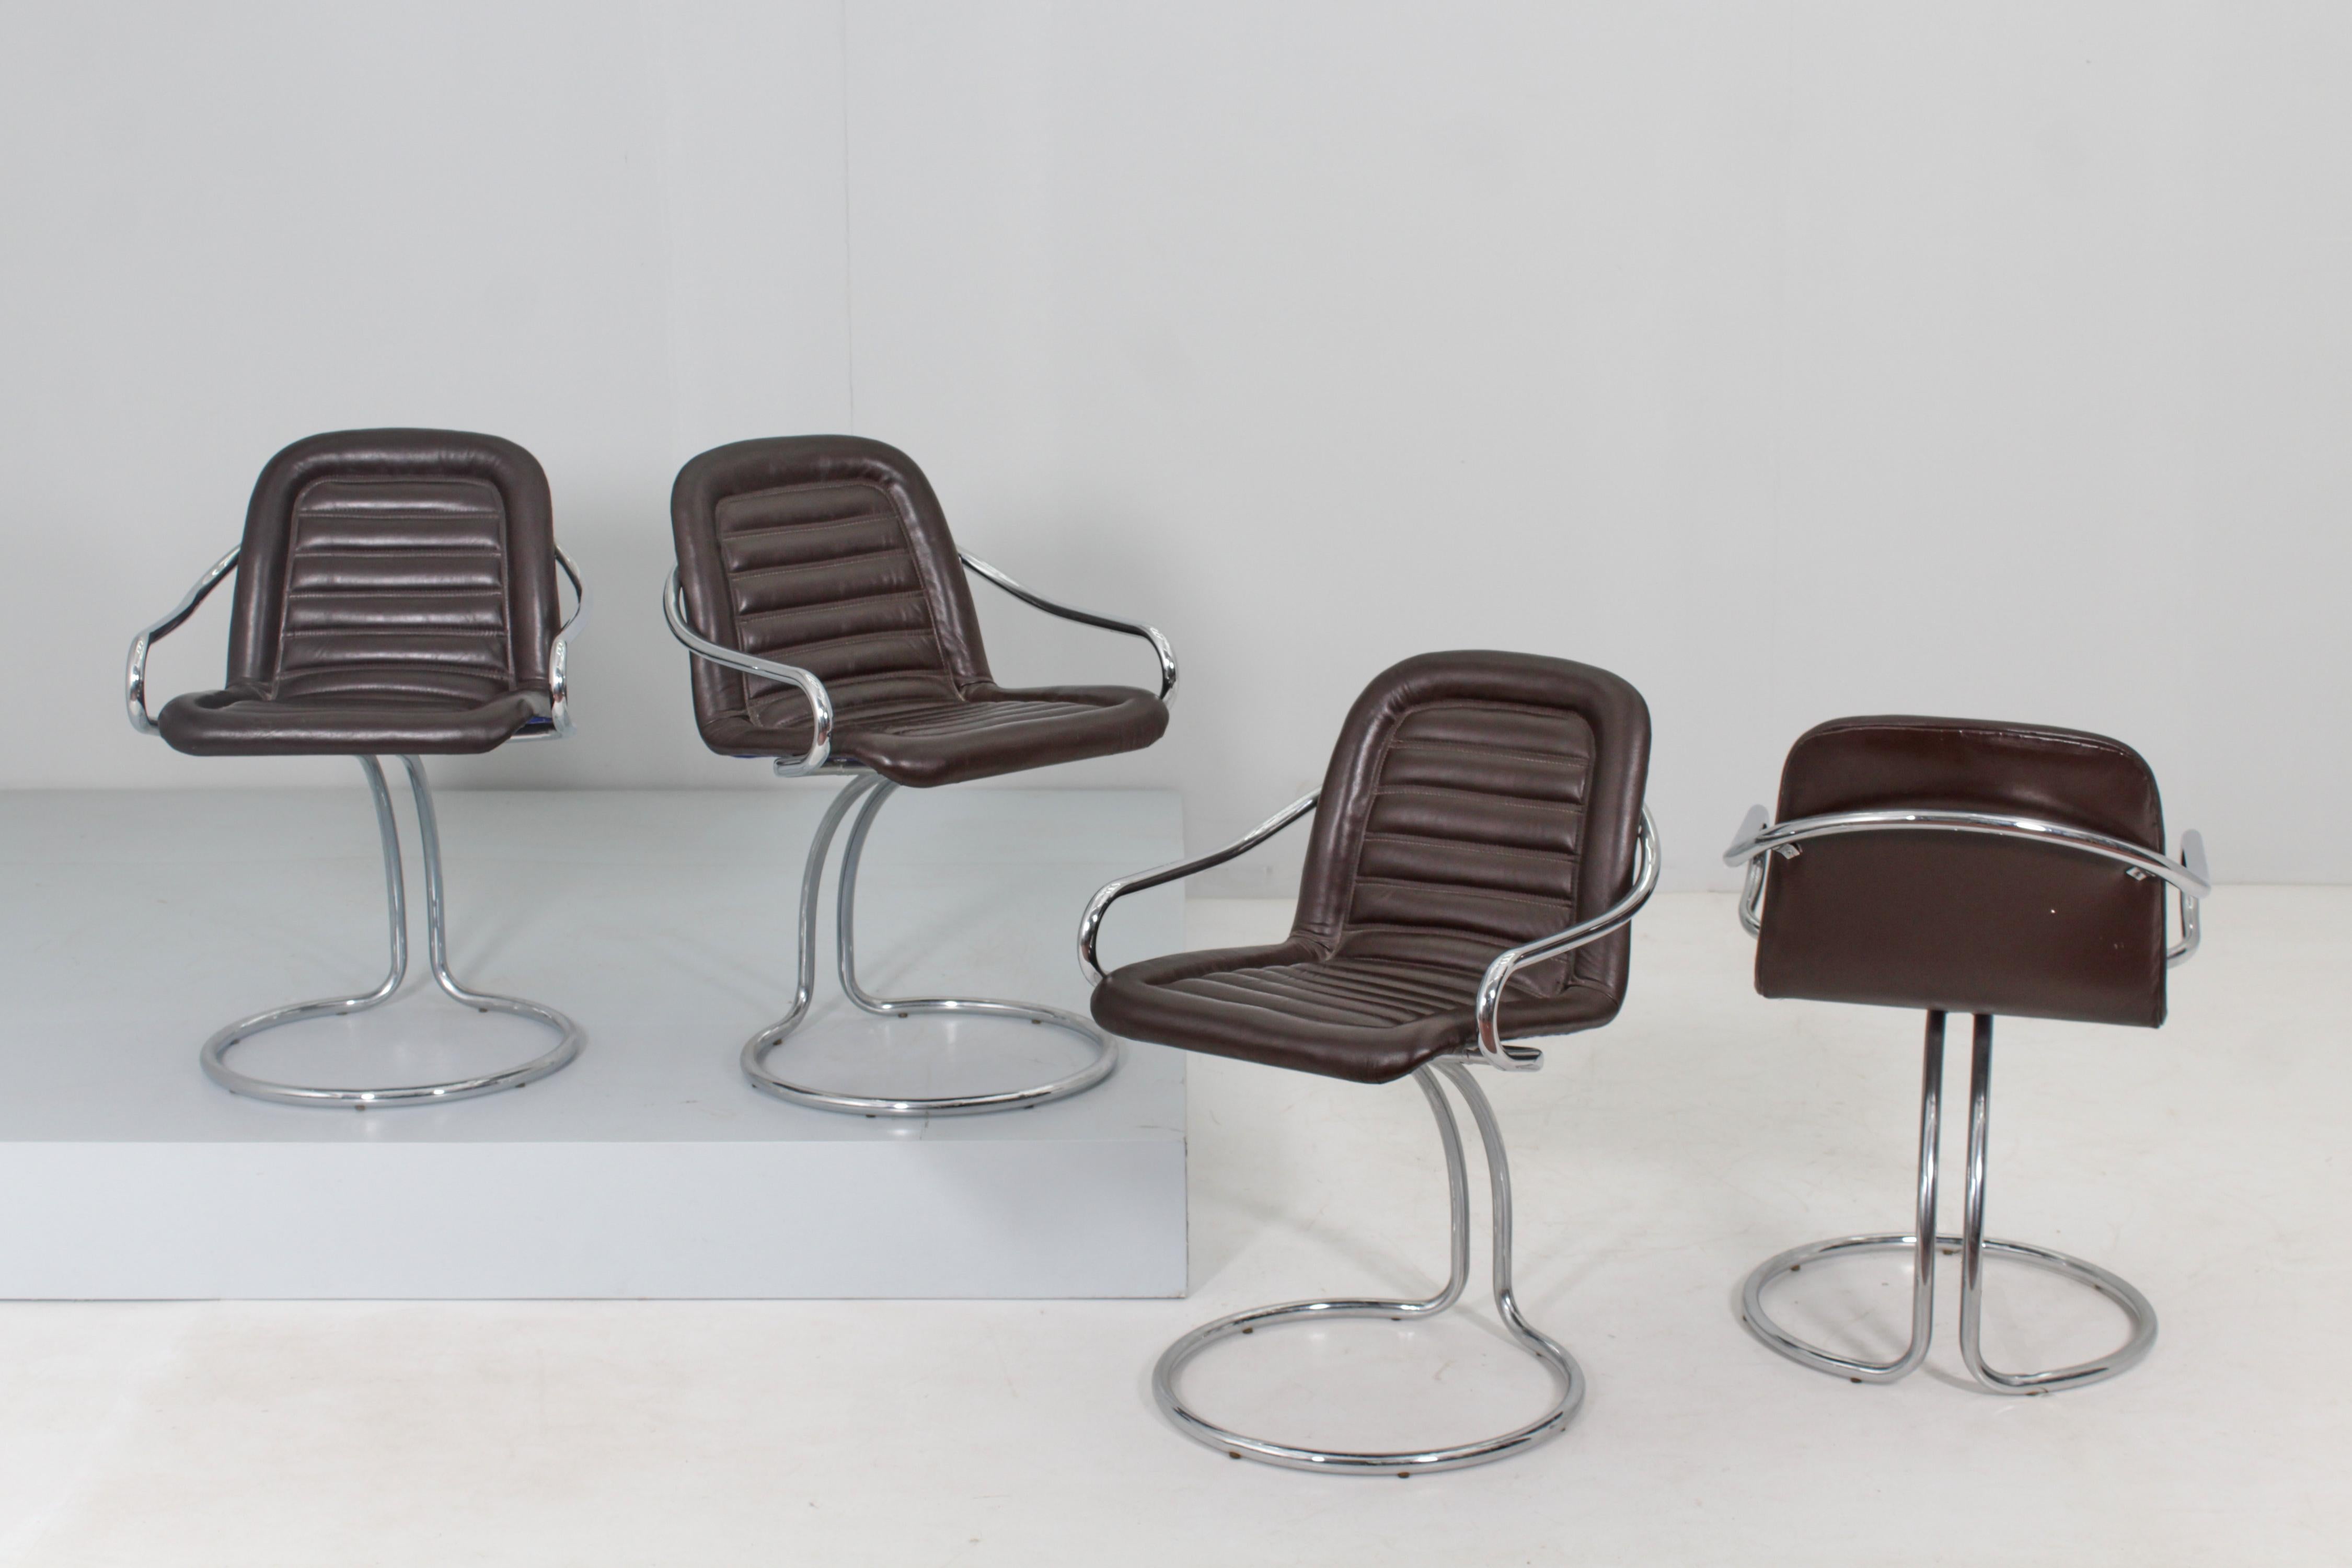 Beautiful and stylish vintage set of 4 cantilever chairs with curved structure in chromed tubular steel and seat in quilted dark brown leather. Attributer to Gastone Rinaldi for RIMA, Italian production of the 70s.
Wear consistent with age and use.